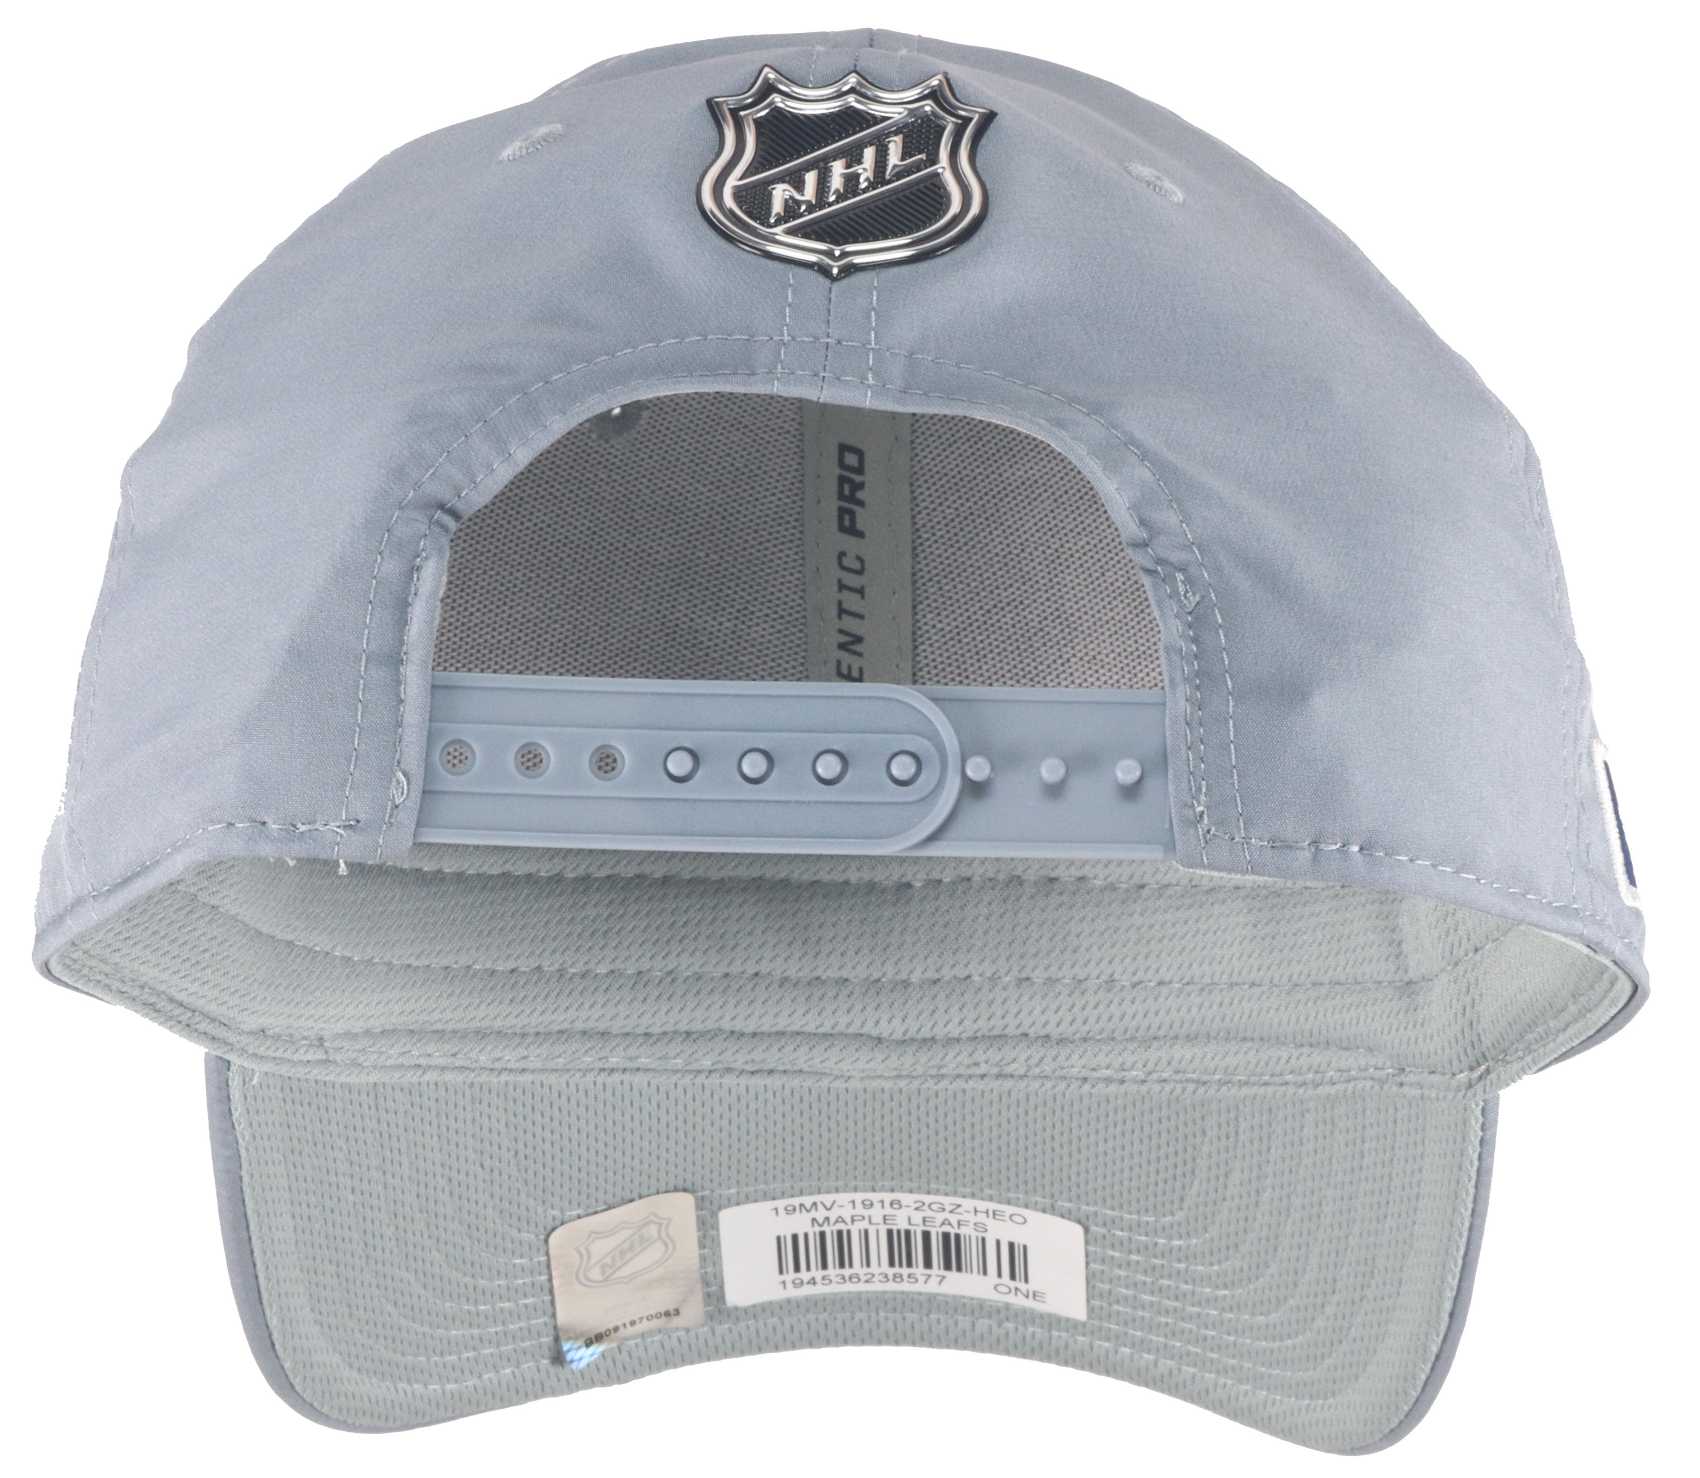 Toronto Maple Leafs NHL Authentic Pro Home Ice Structured Curved Snapback Cap Grey Fanatics